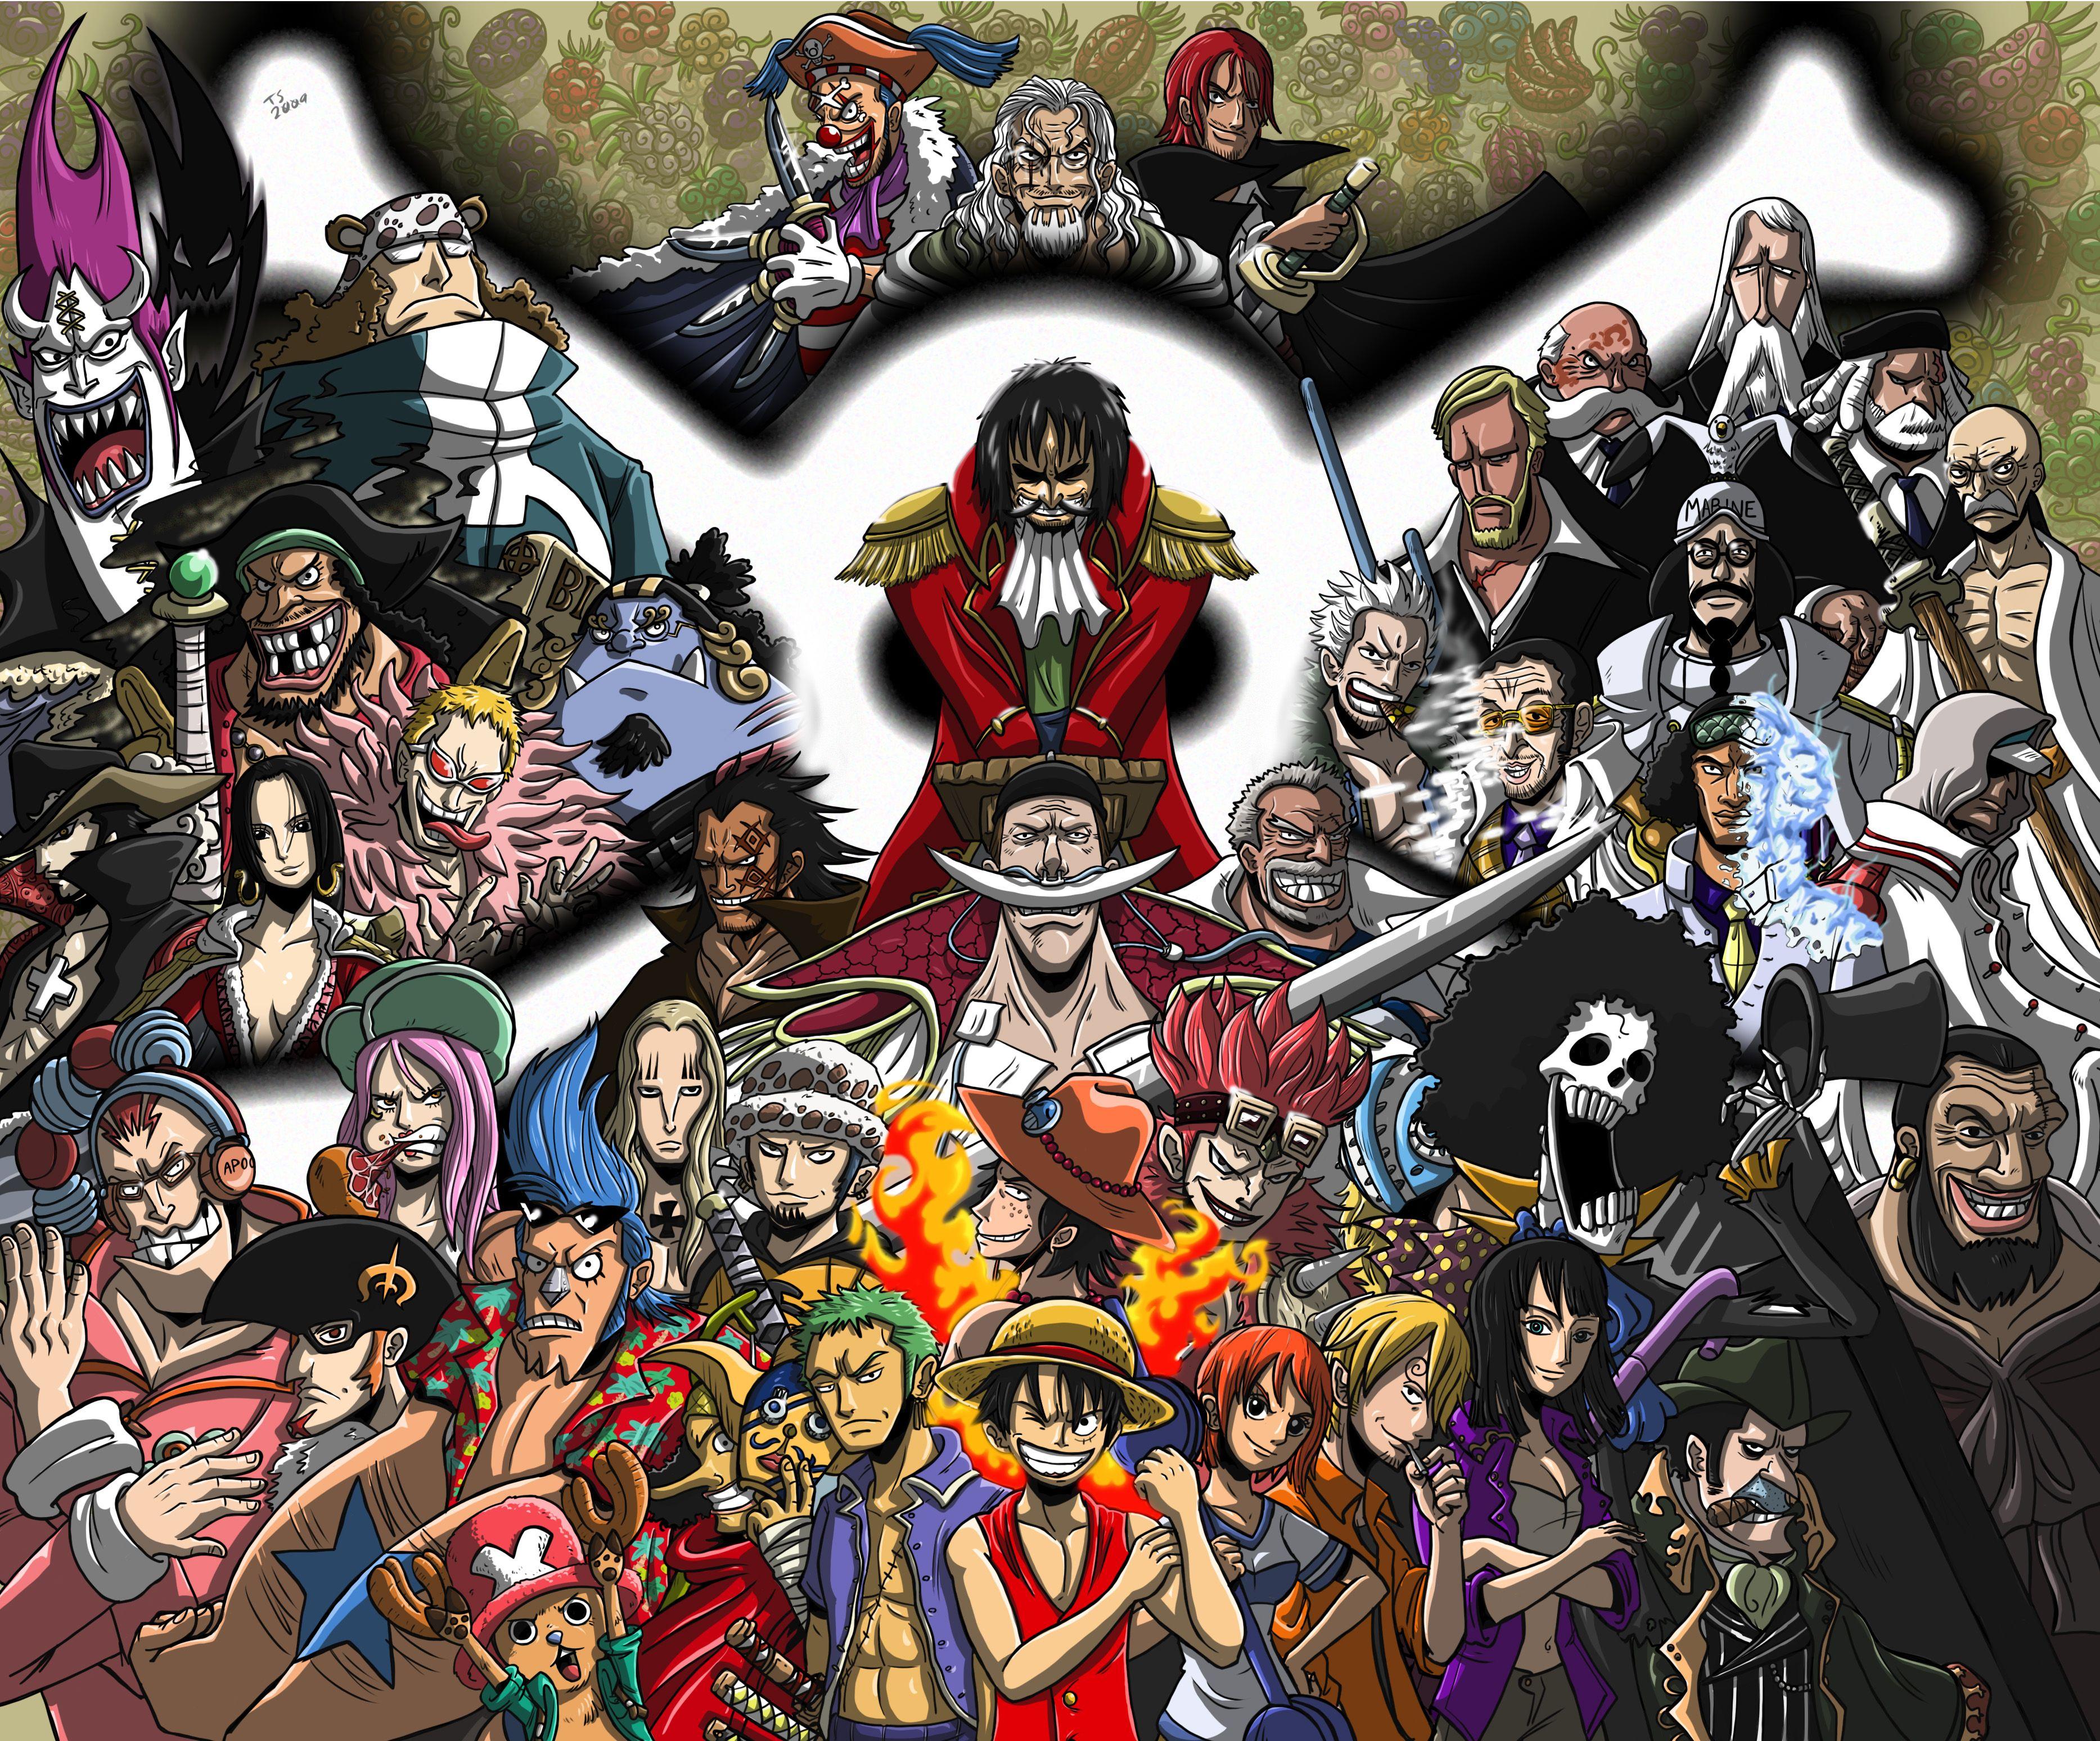 62 One Piece Wallpapers Hd 4k 5k For Pc And Mobile Download Free Images For Iphone Android